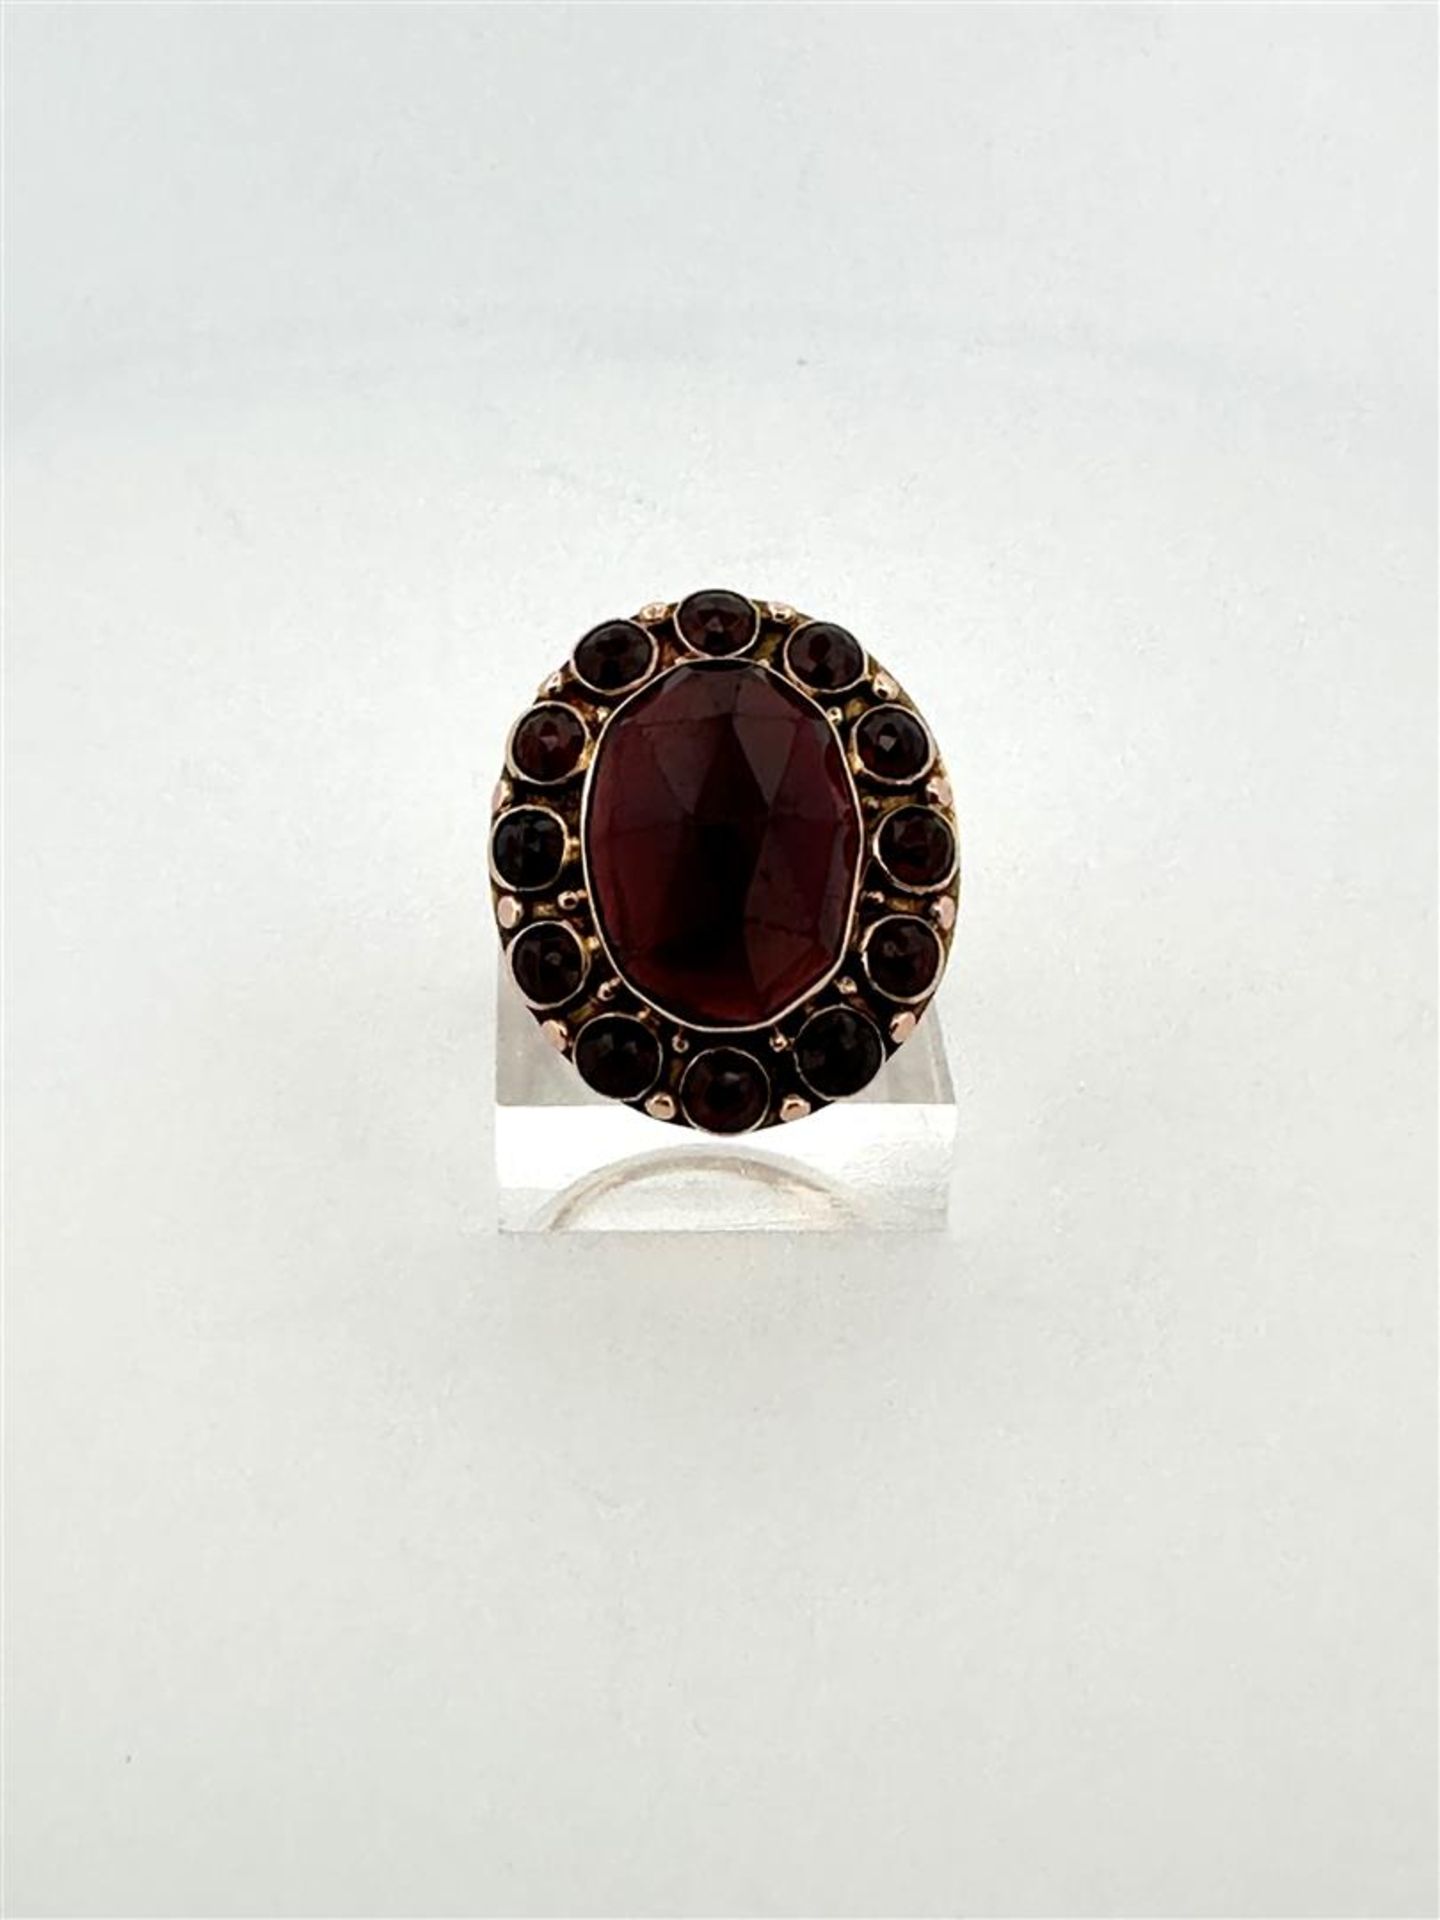 14kt yellow gold cocktail ring set with garnet.
The ring is set with 1 oval rose cut garnet measurin